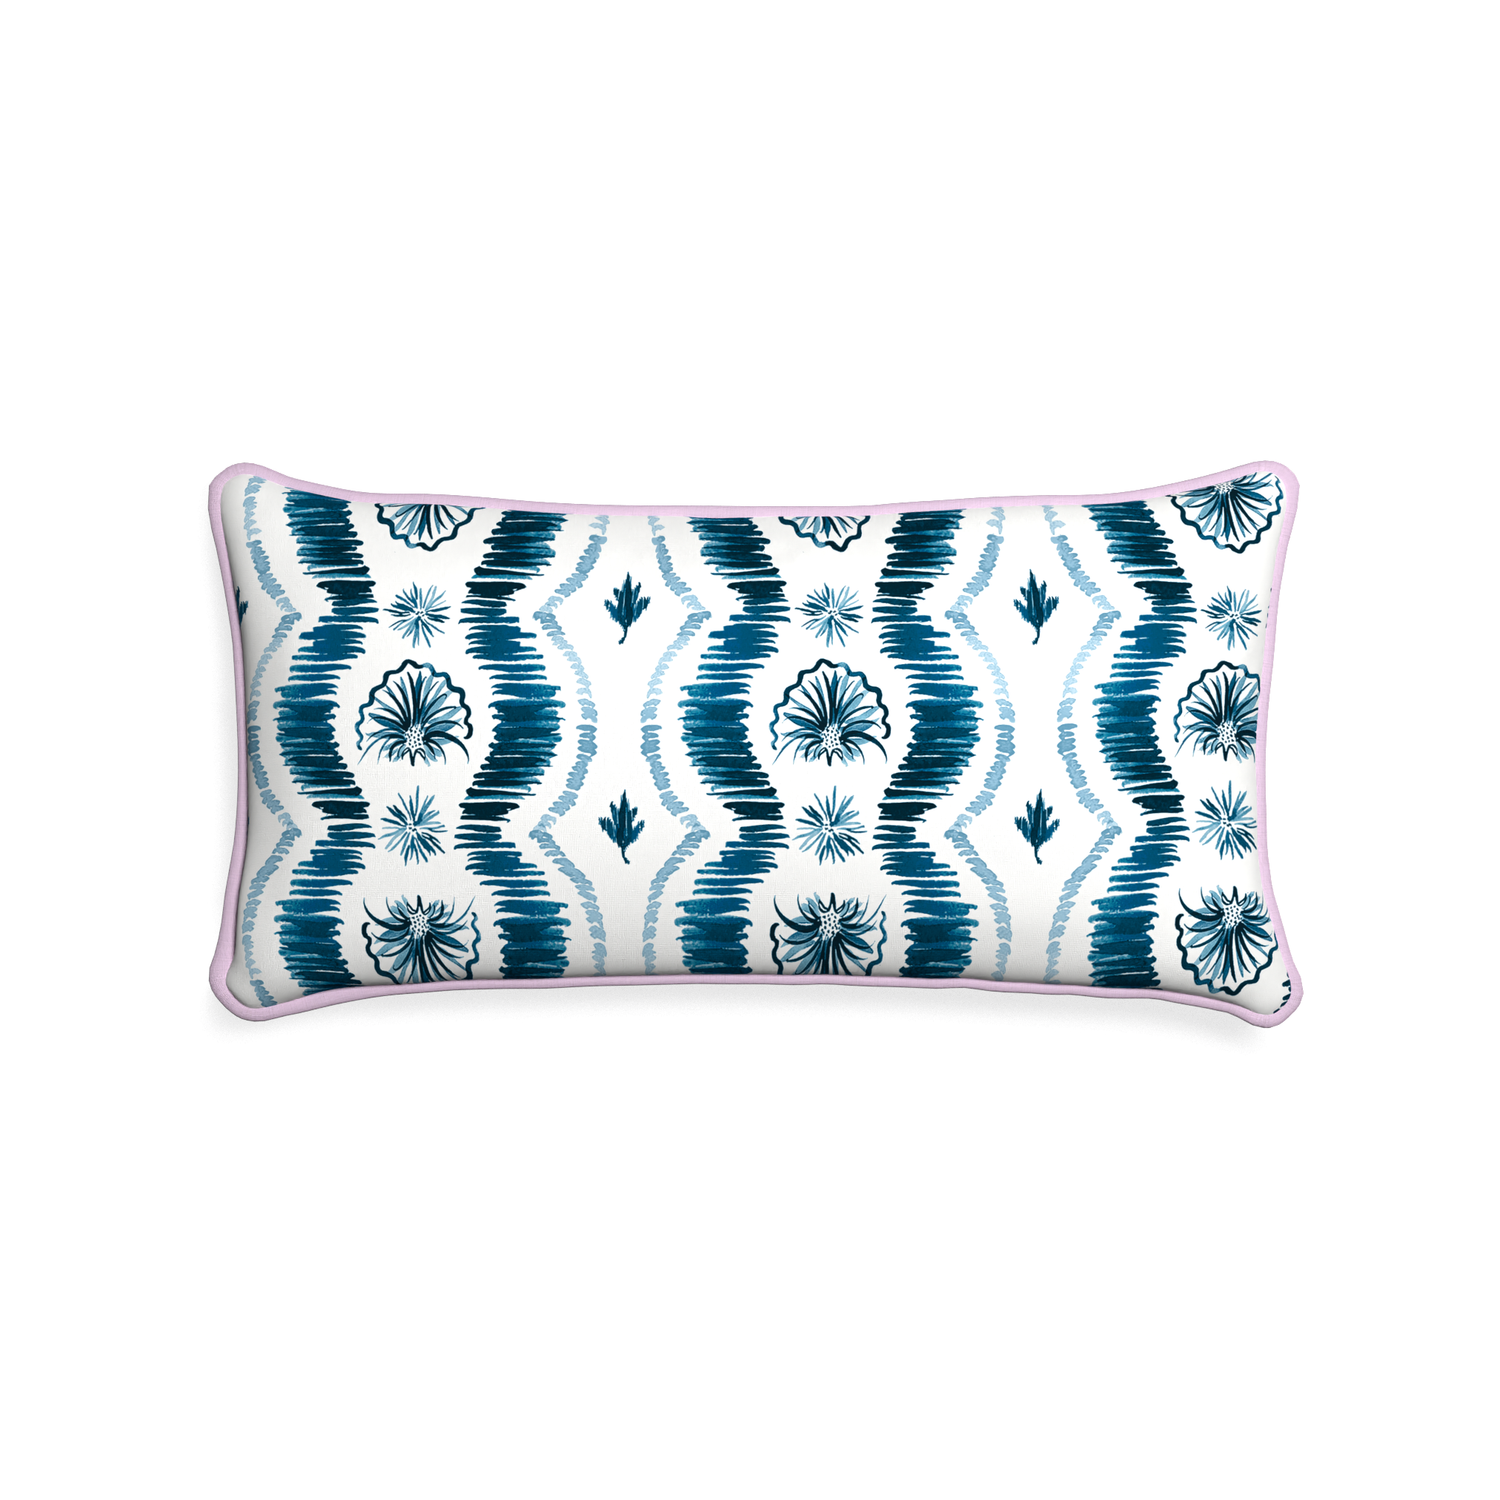 Midi-lumbar alice custom blue ikatpillow with l piping on white background